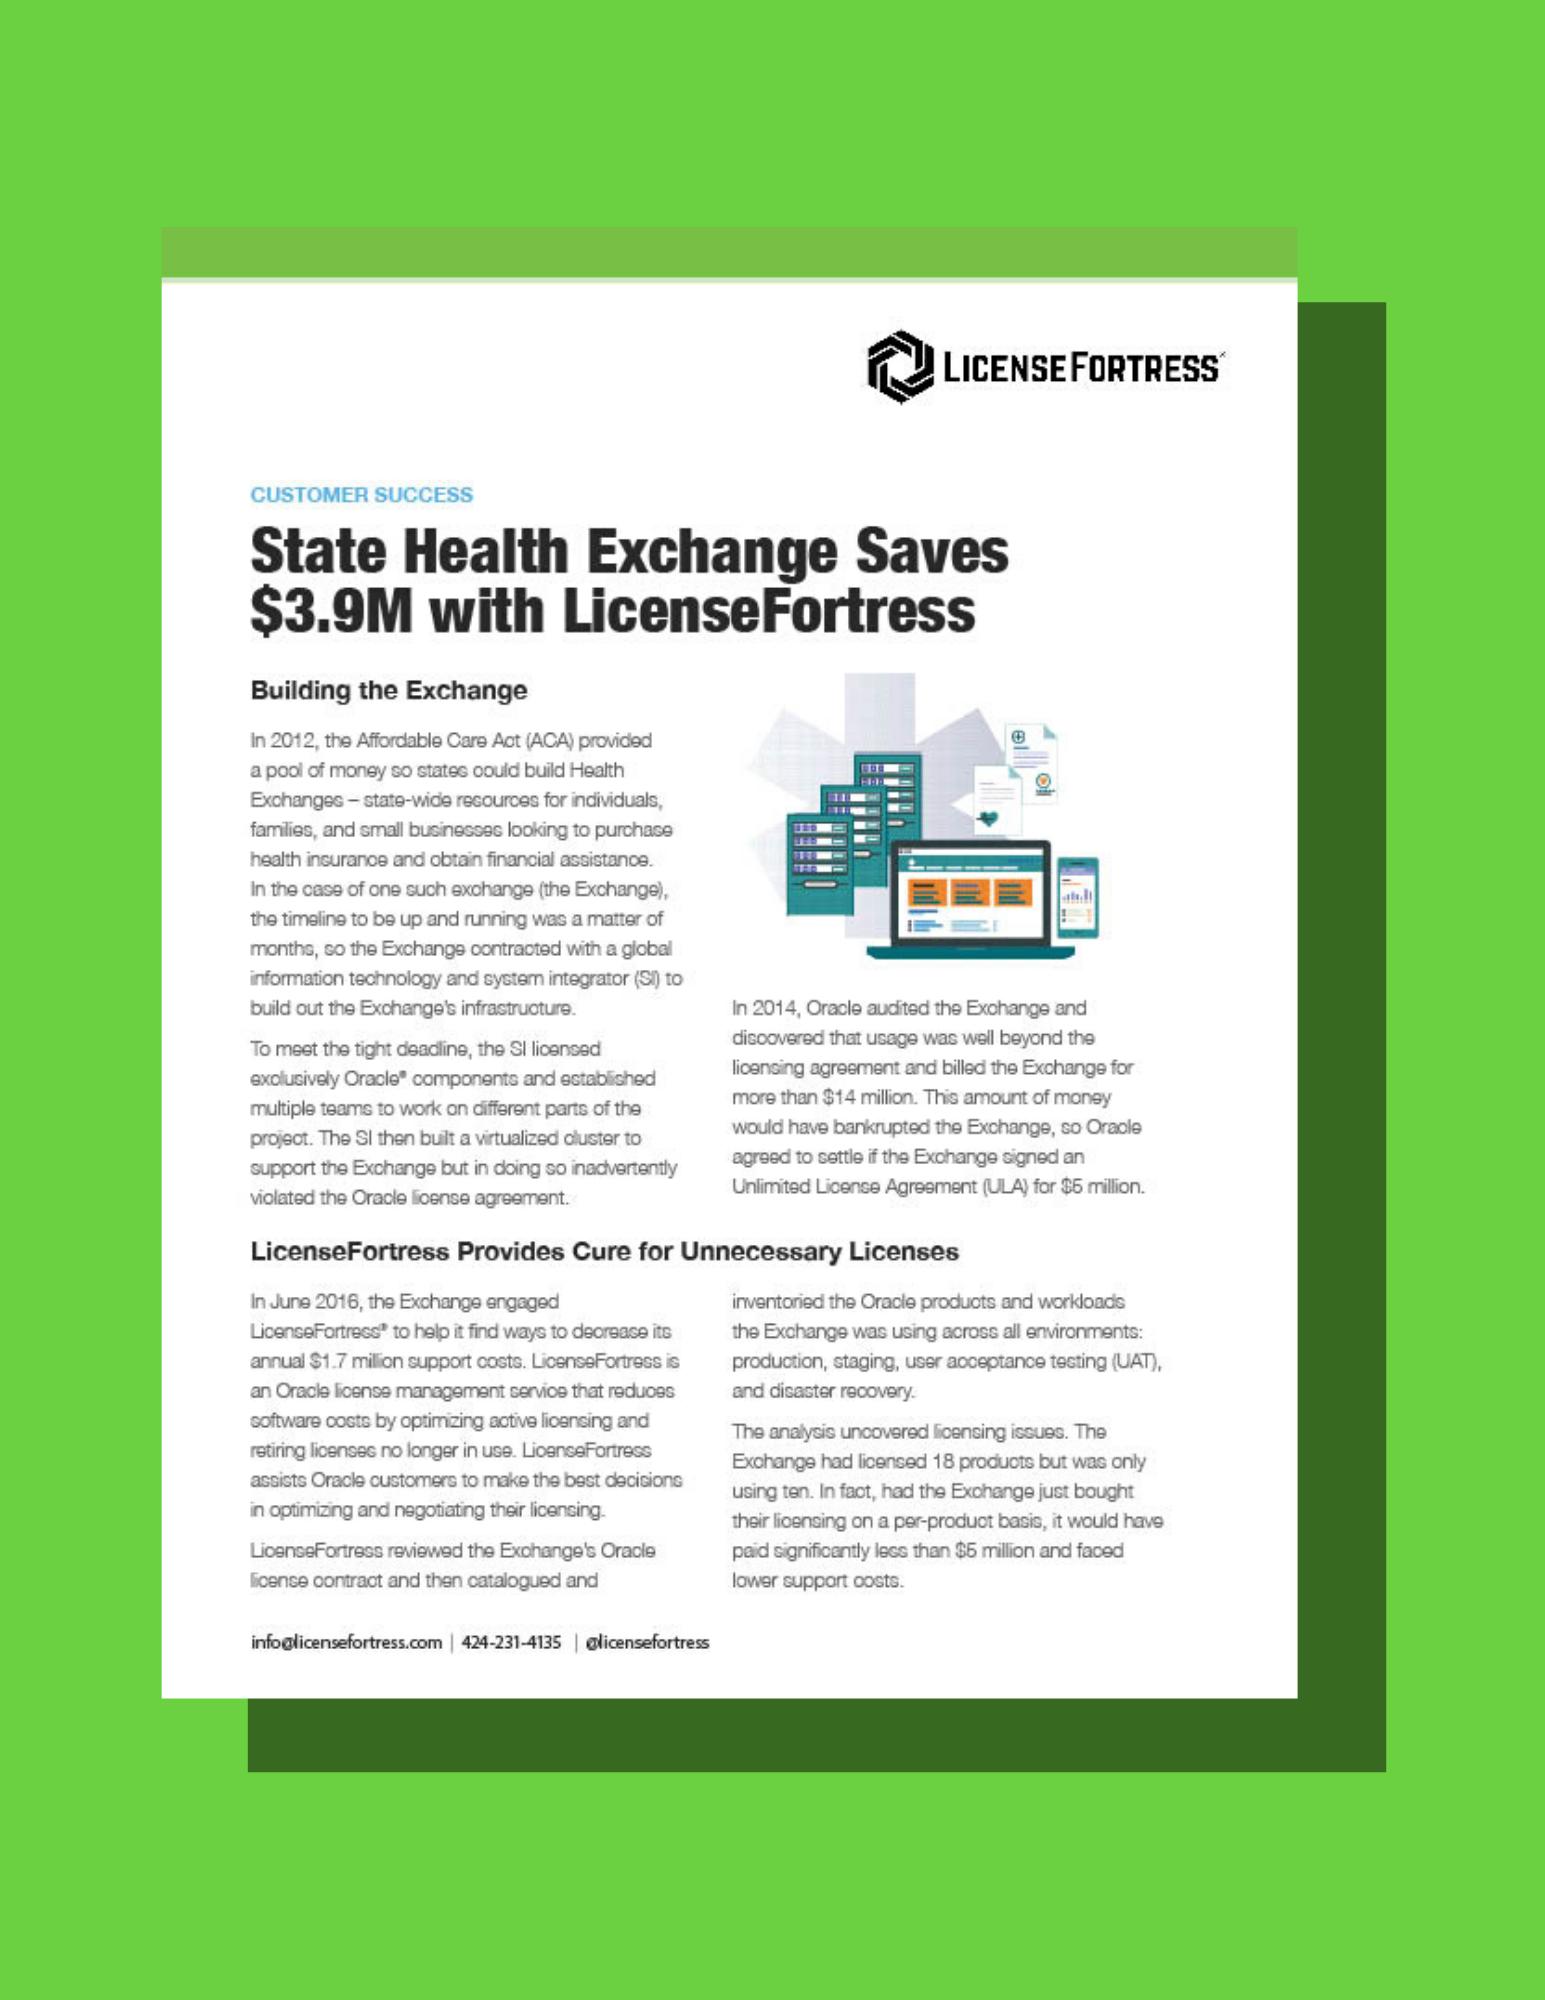 State Health Exchange Saves $3.9M